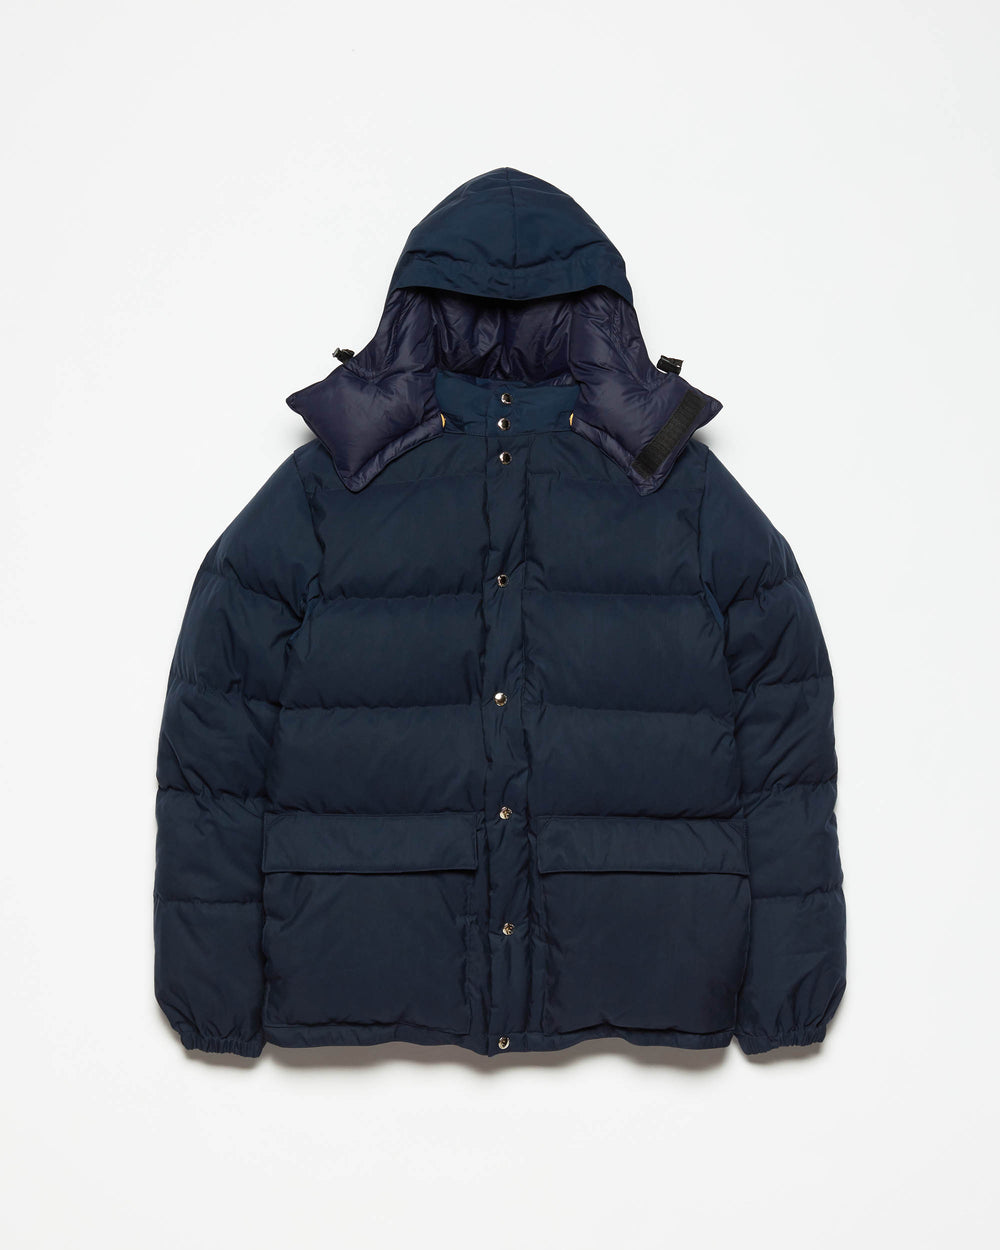 Classico Down Parka 700 fill goose down by Crescent Down Works